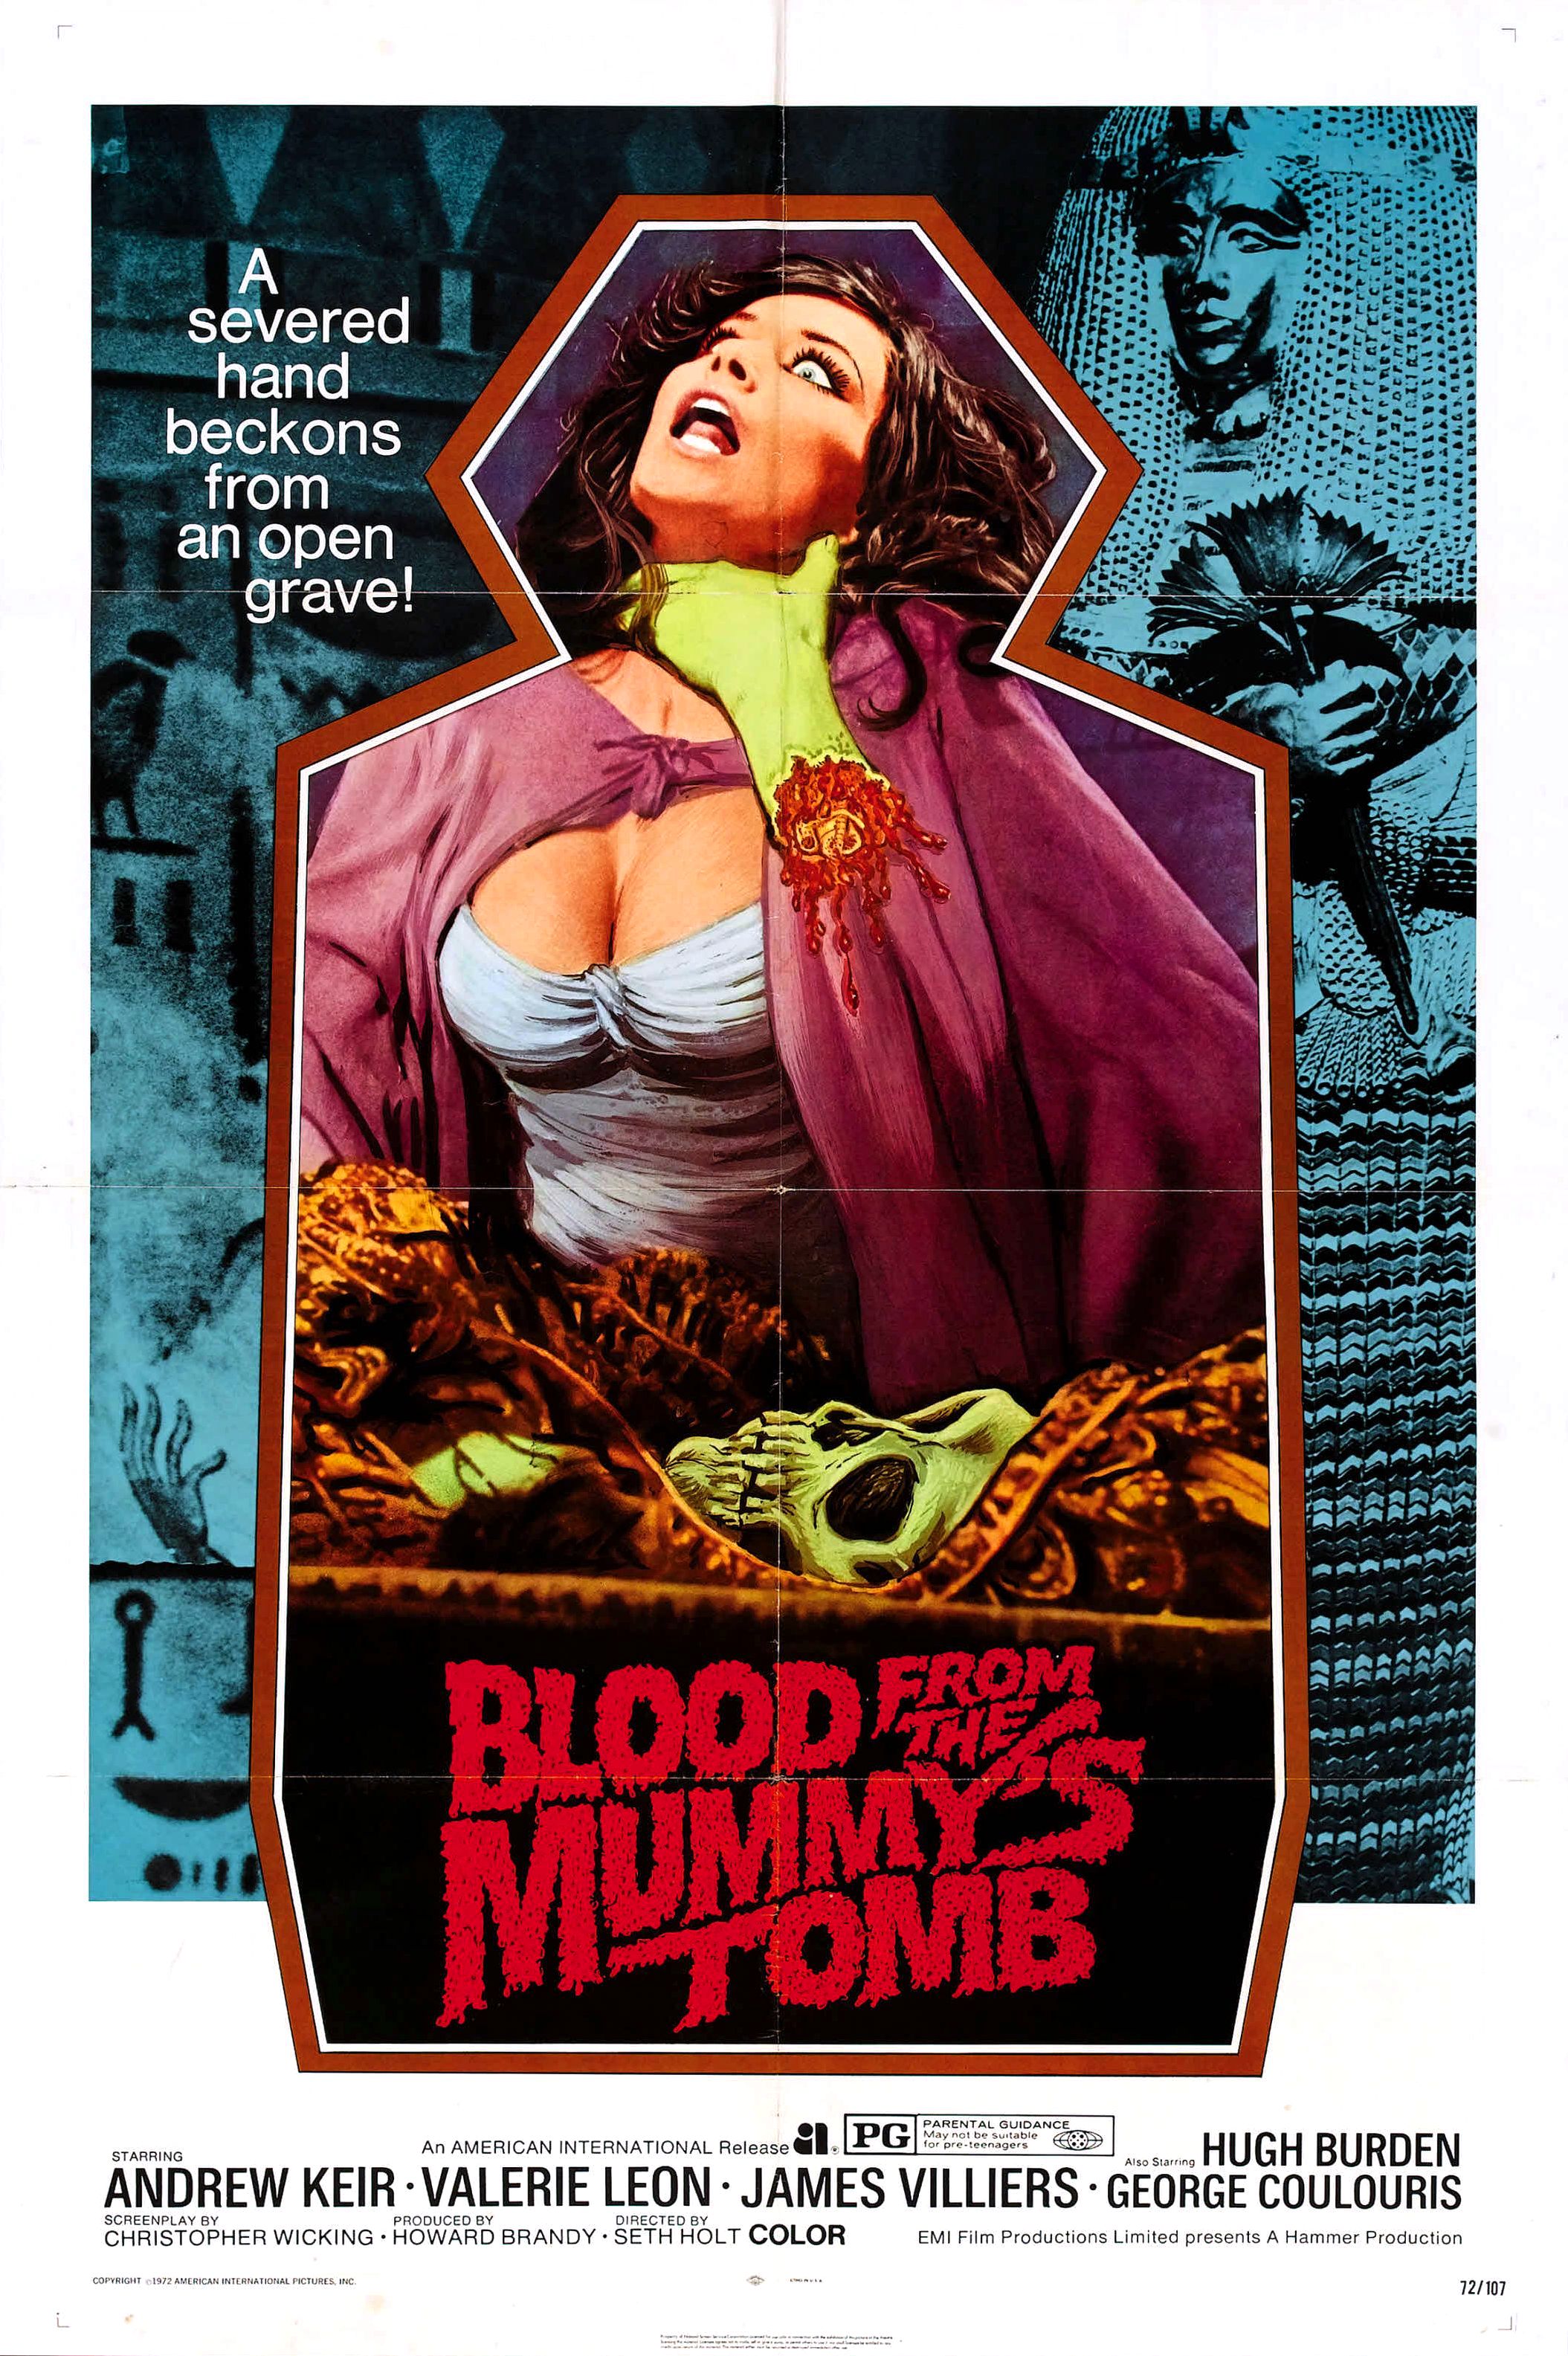 Blood from the Mummy's Tomb